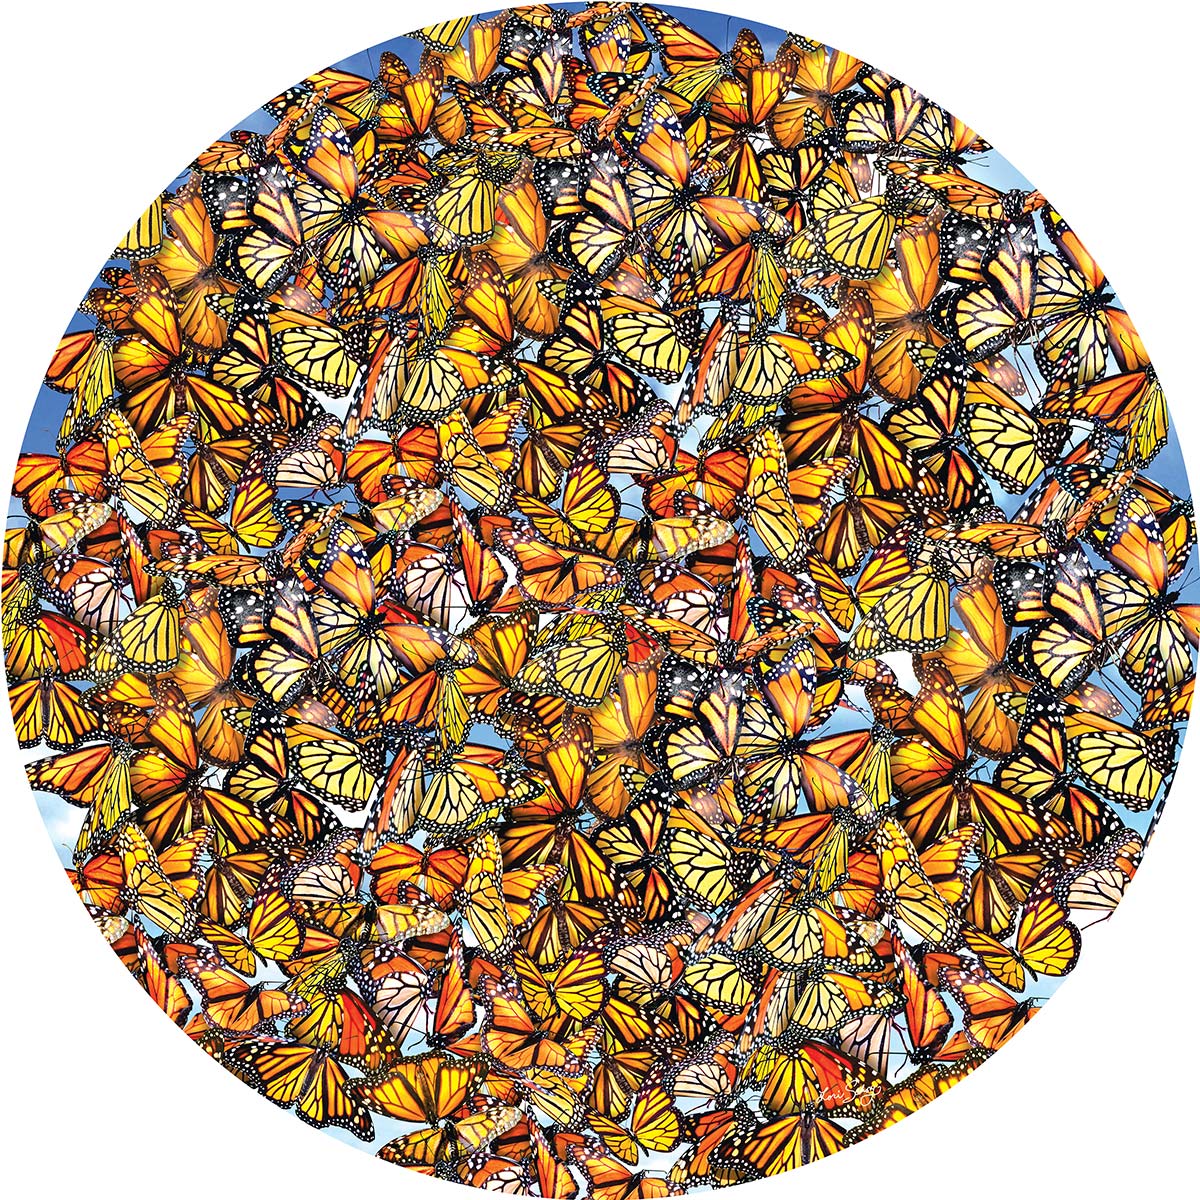 Monarch Frenzy Butterflies and Insects Jigsaw Puzzle